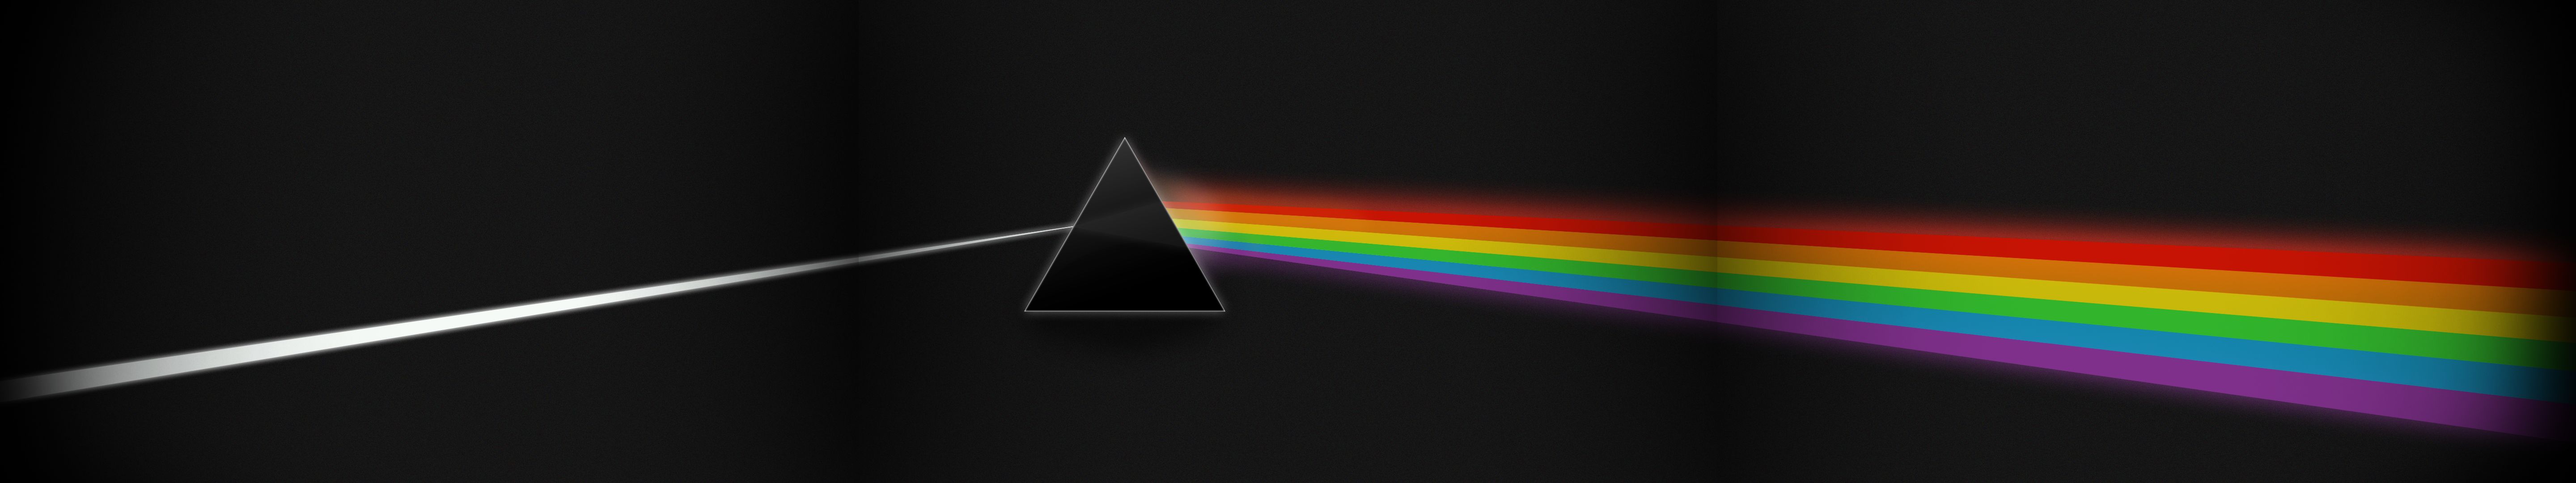 Dark Side of the Moon - Triple Monitor Wallpaper by Dosycool on ...